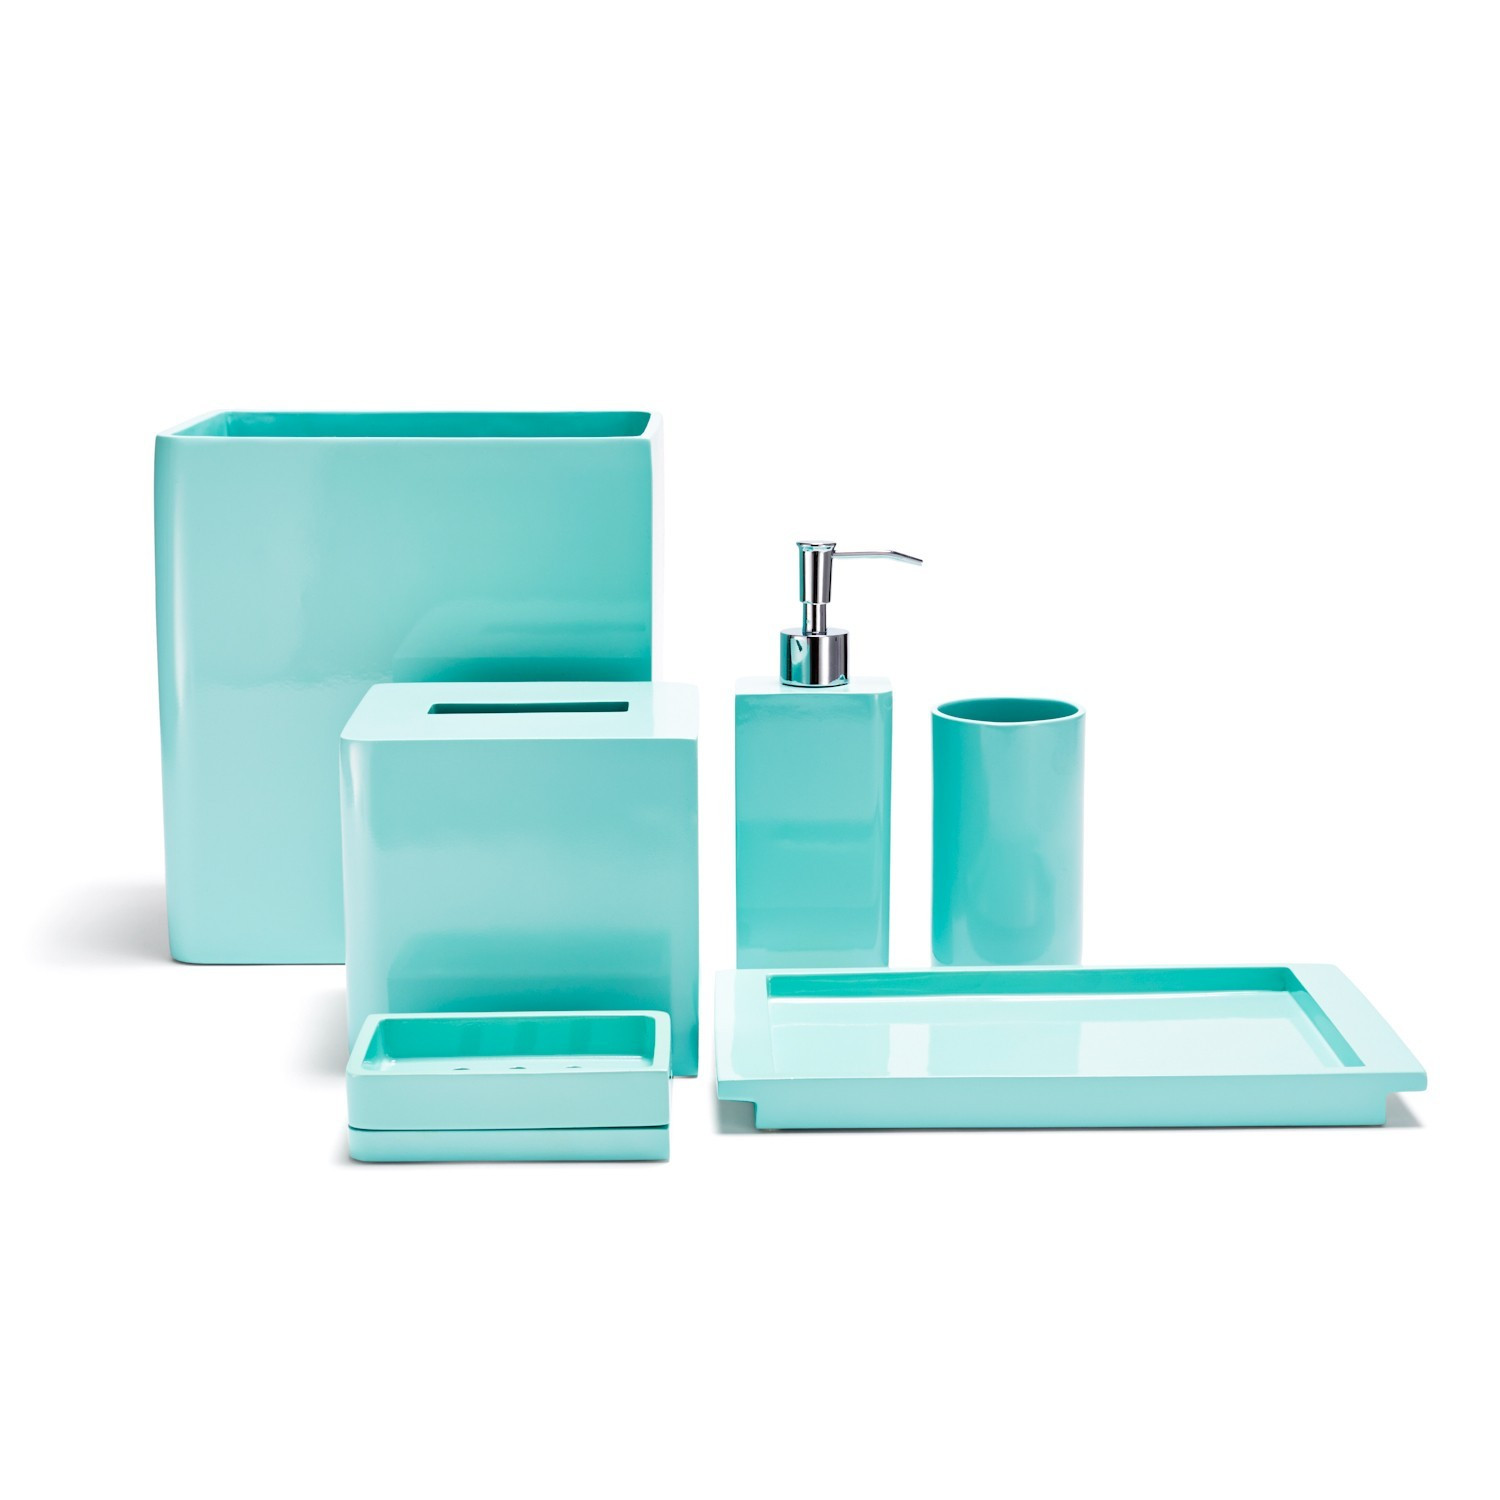 Teal Bathroom Decor
 Awesome Teal Bathroom Accessories Sets Architecture Home